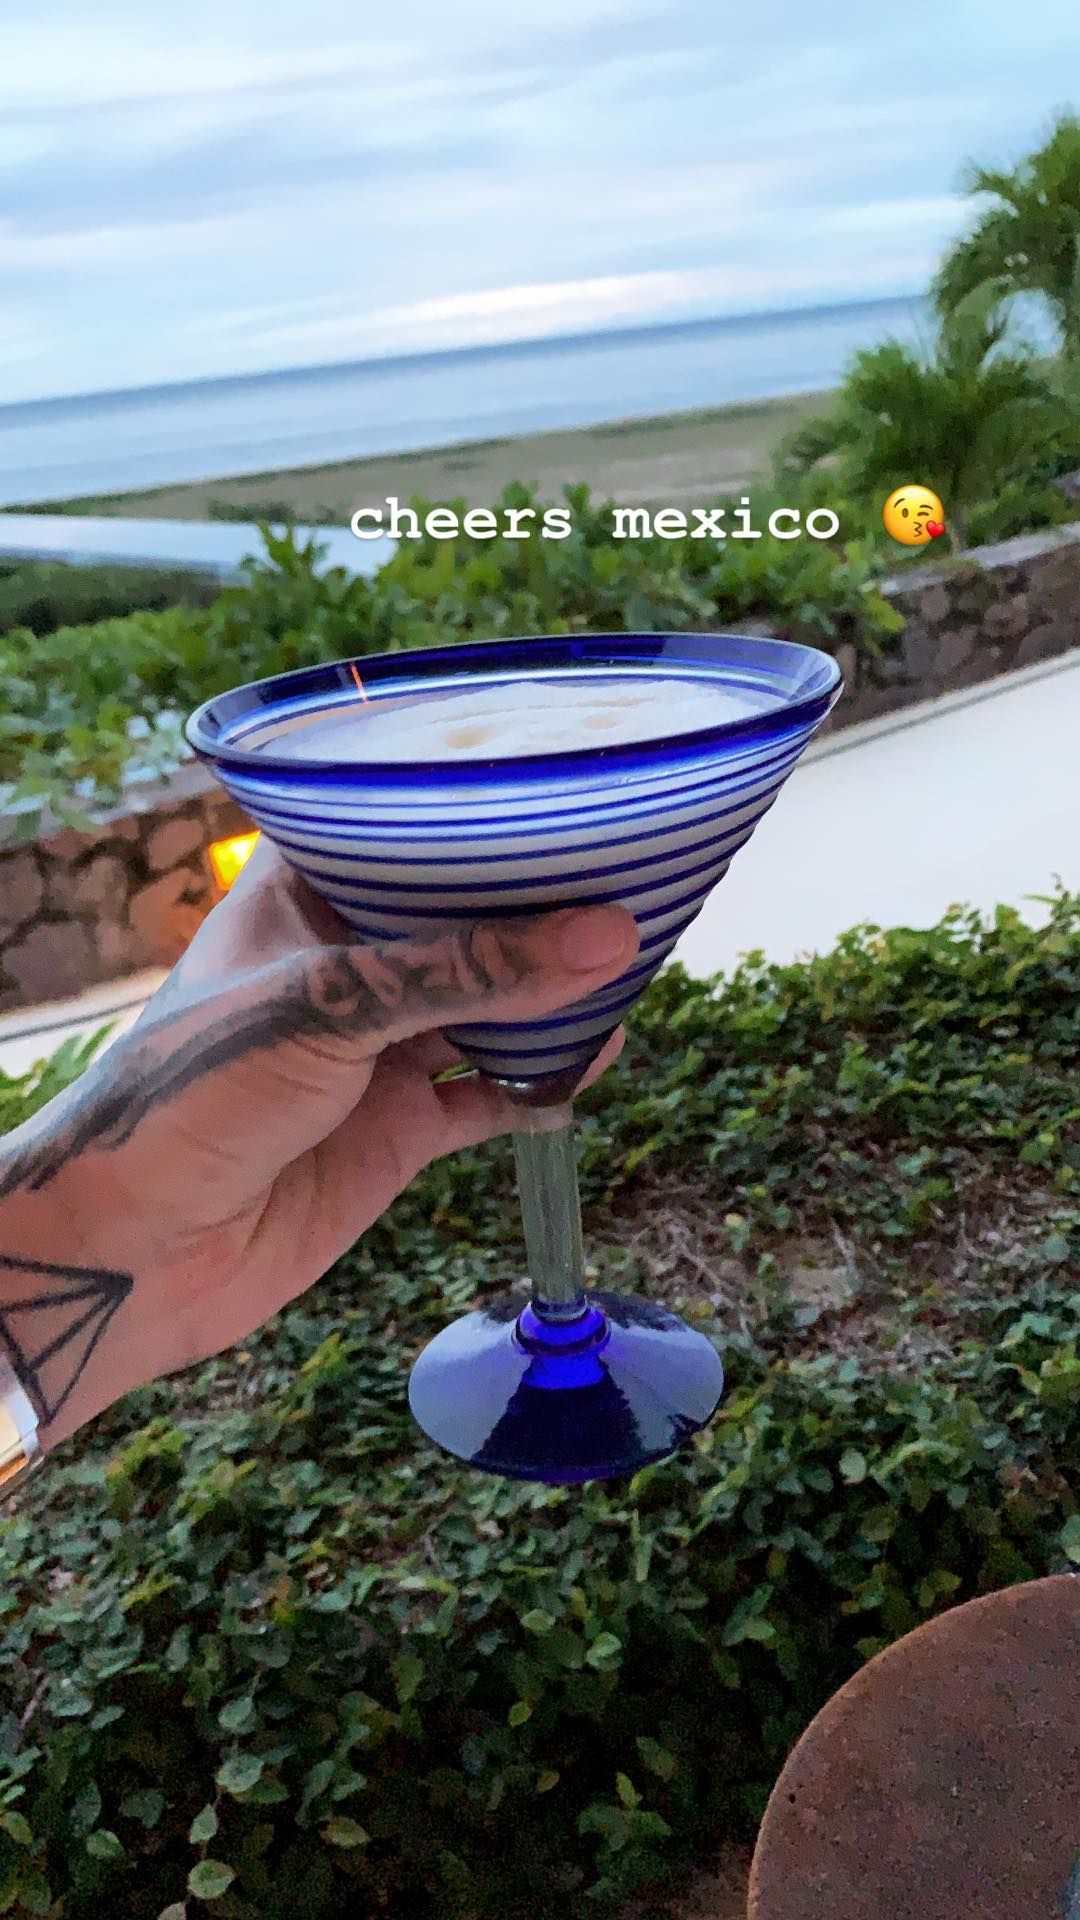 Bill's IG-Story #6 (30.12.18, Quinto Sol, Costa Careyes, Mexico)